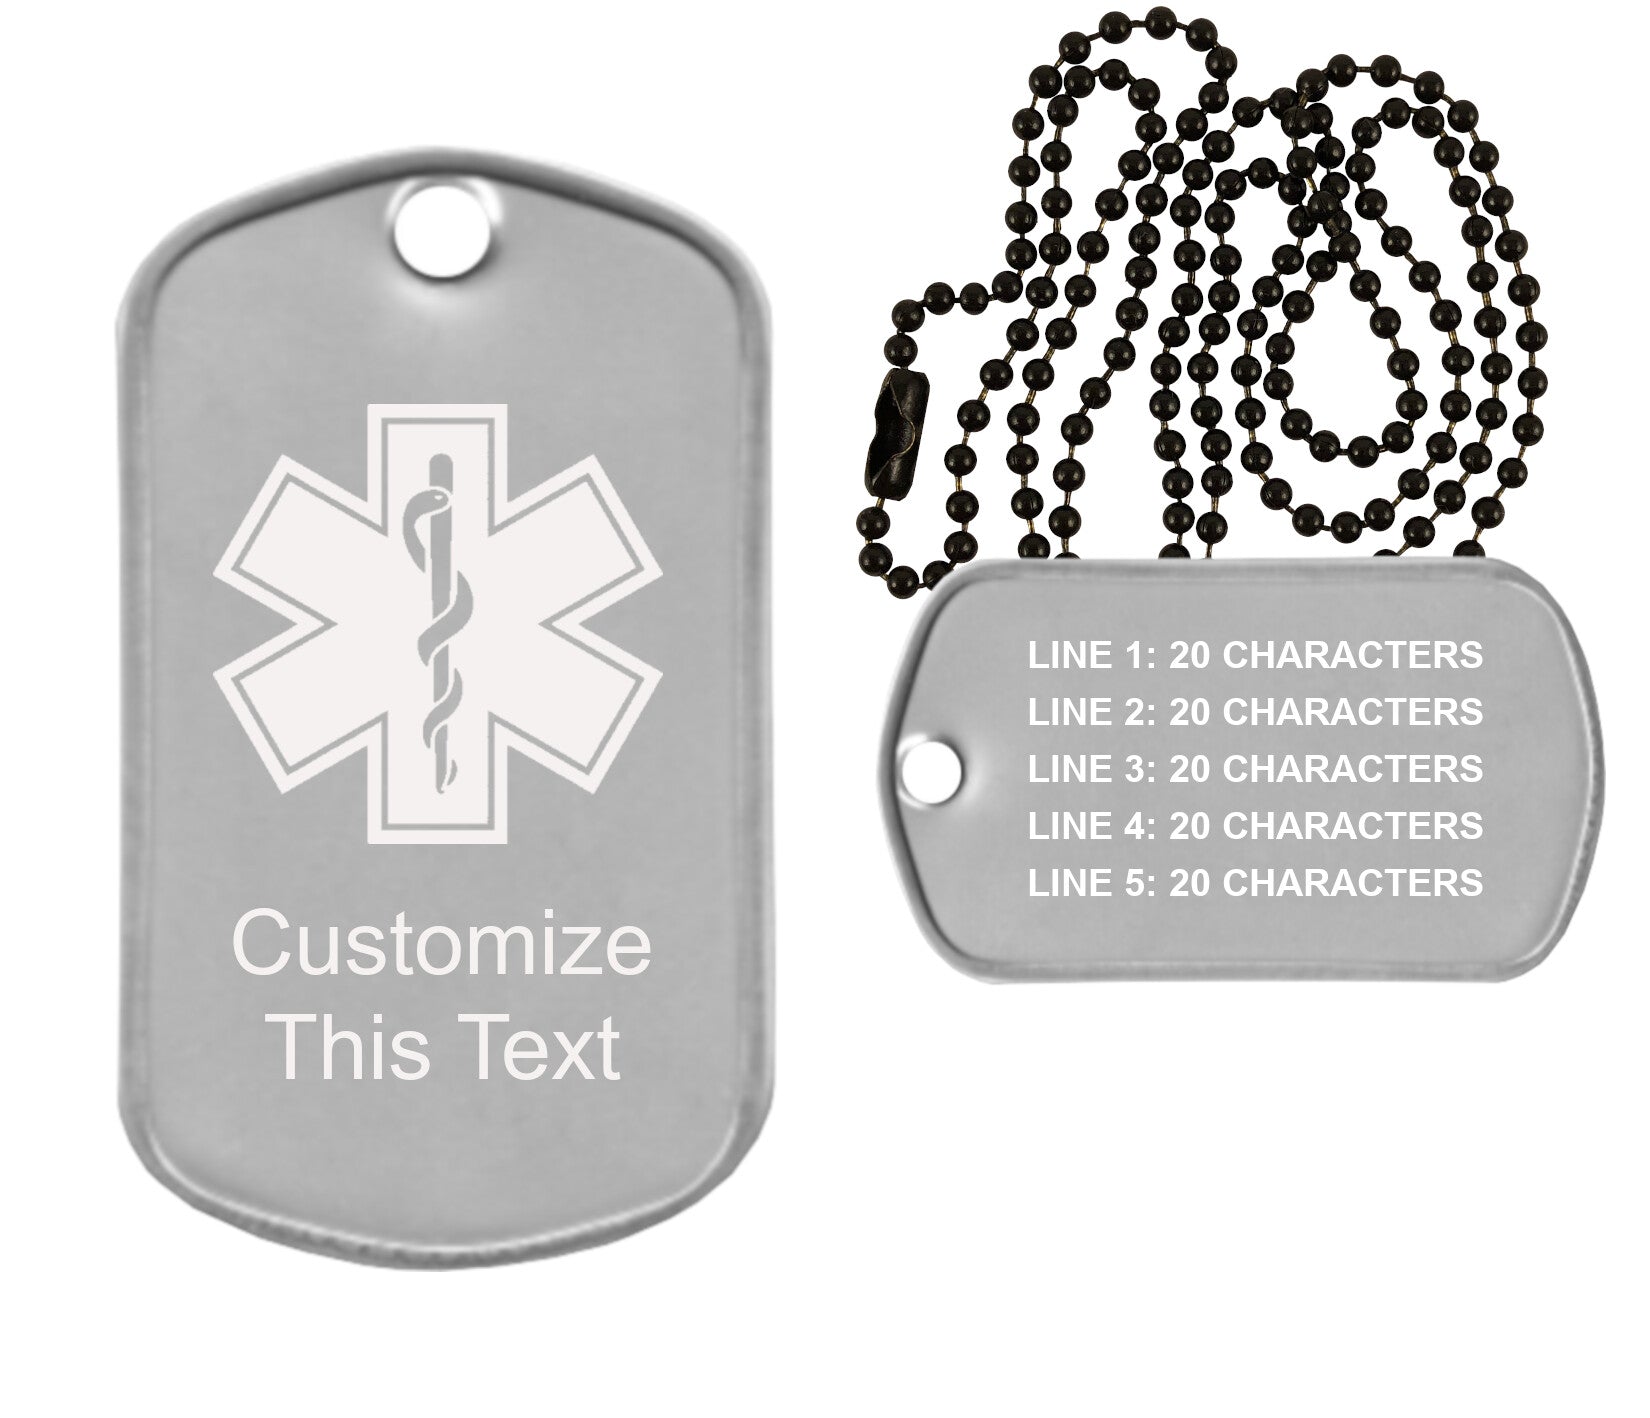 Personalized Military Dog Tags - RED Aluminum